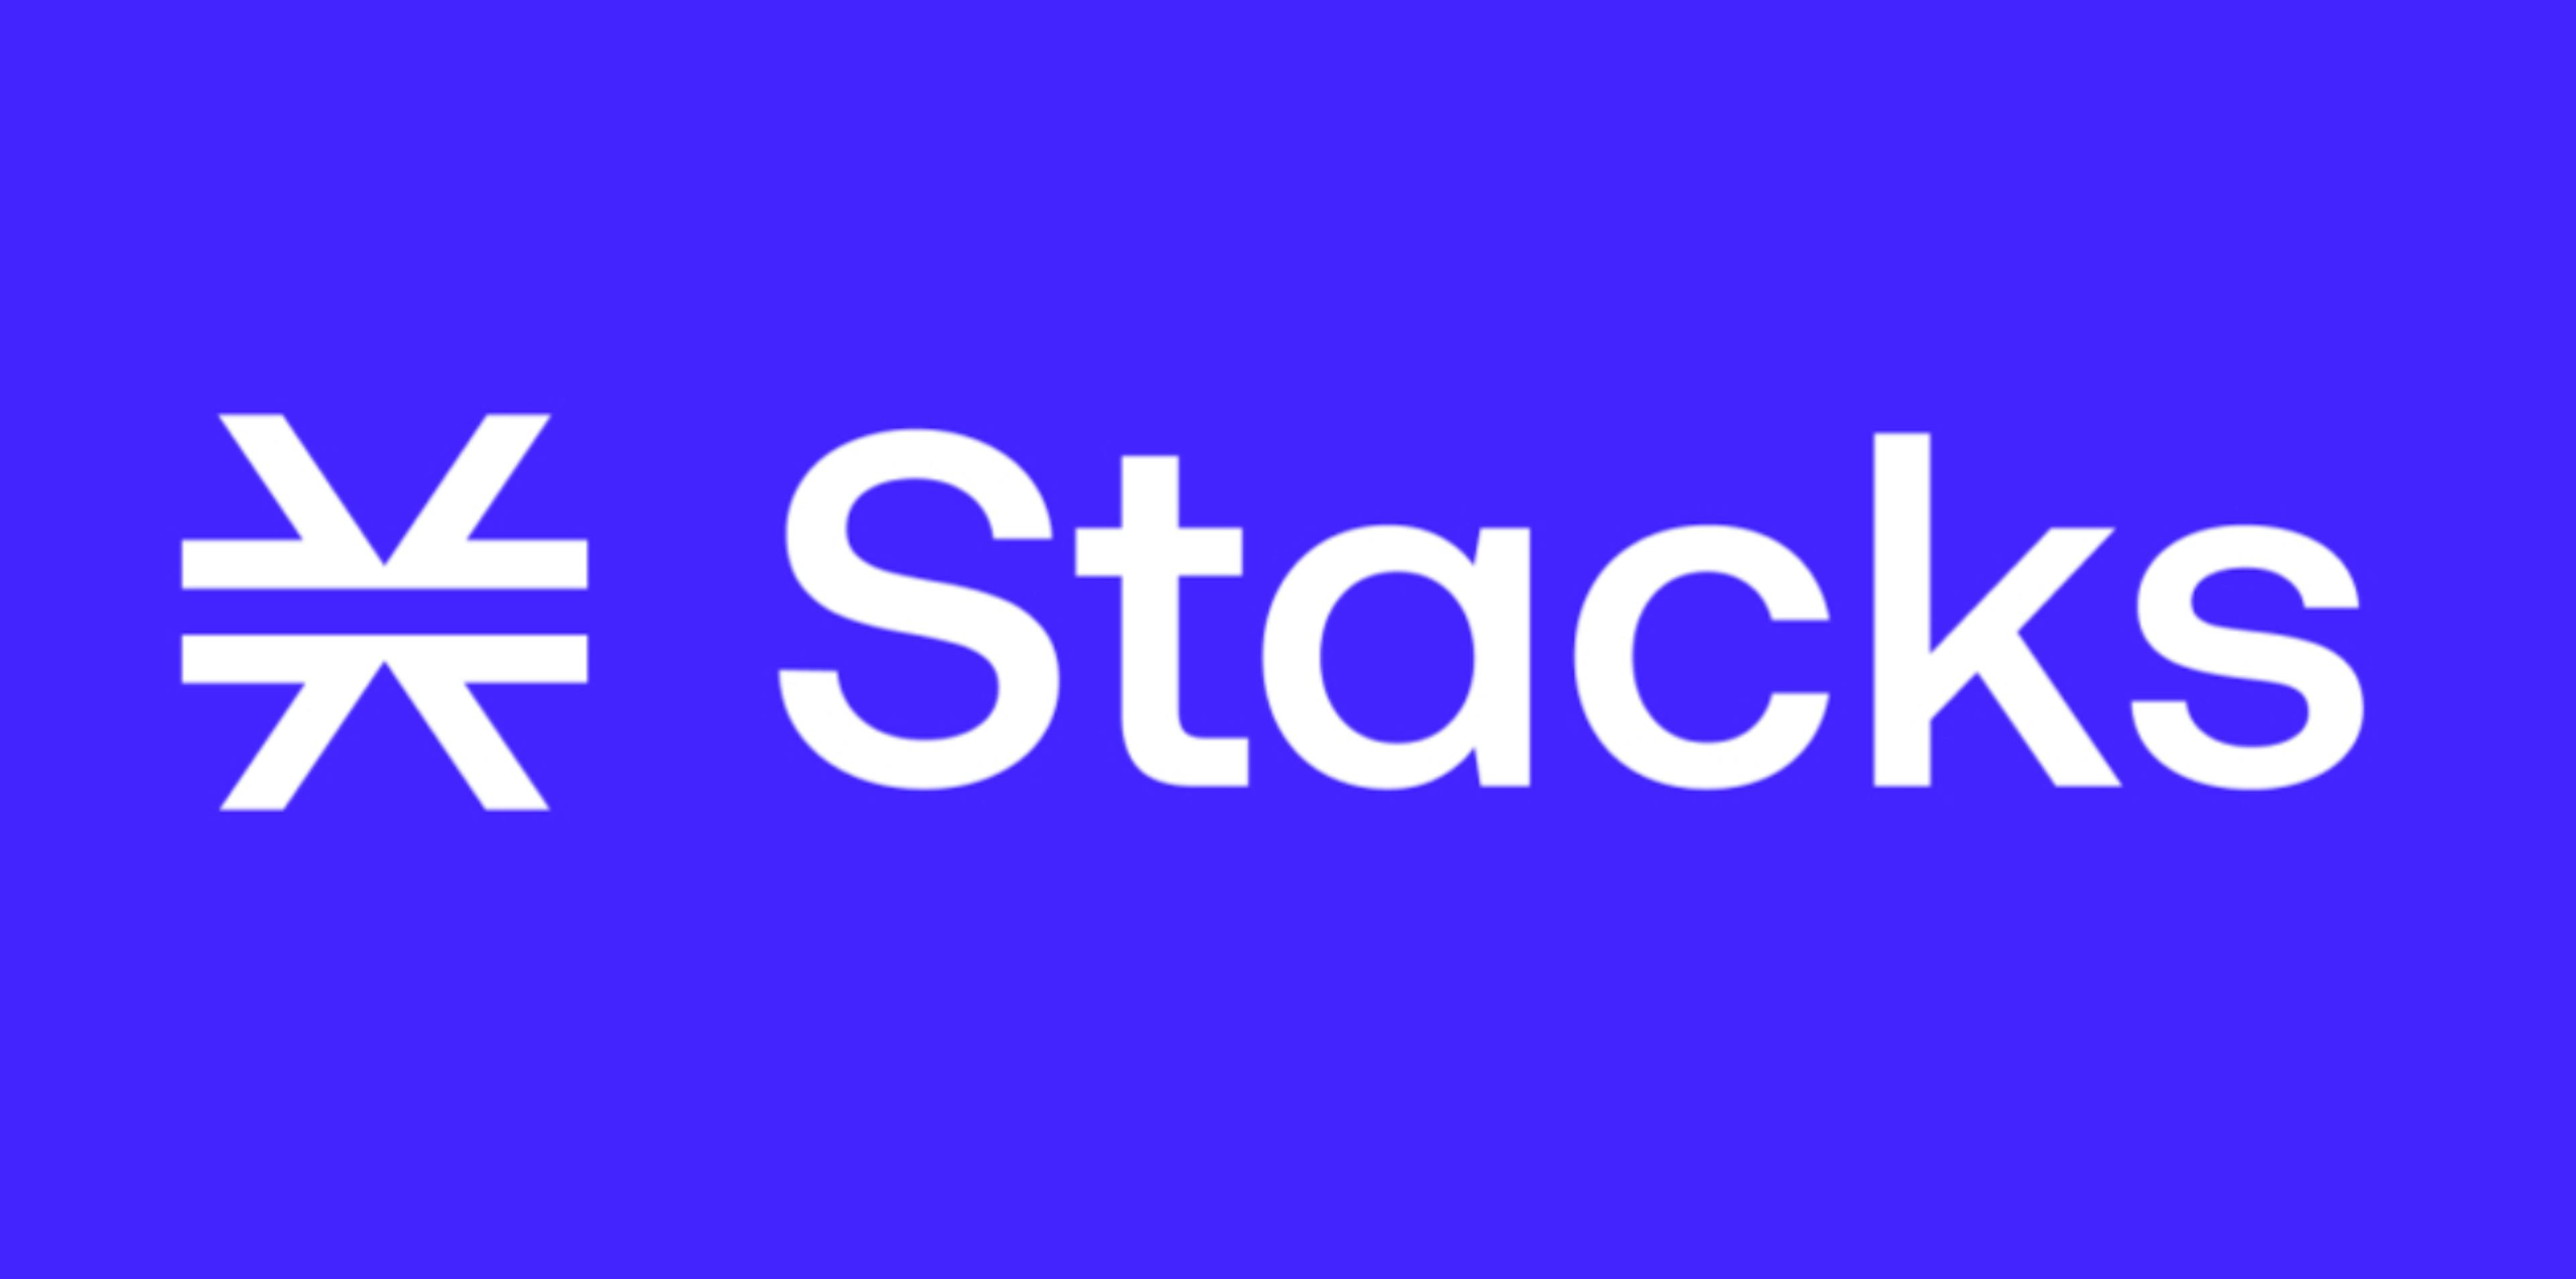 featured image - What the Heck Is Stacks? An Indepth Look Into One of the Largest L2 in the Bitcoin Ecosystem